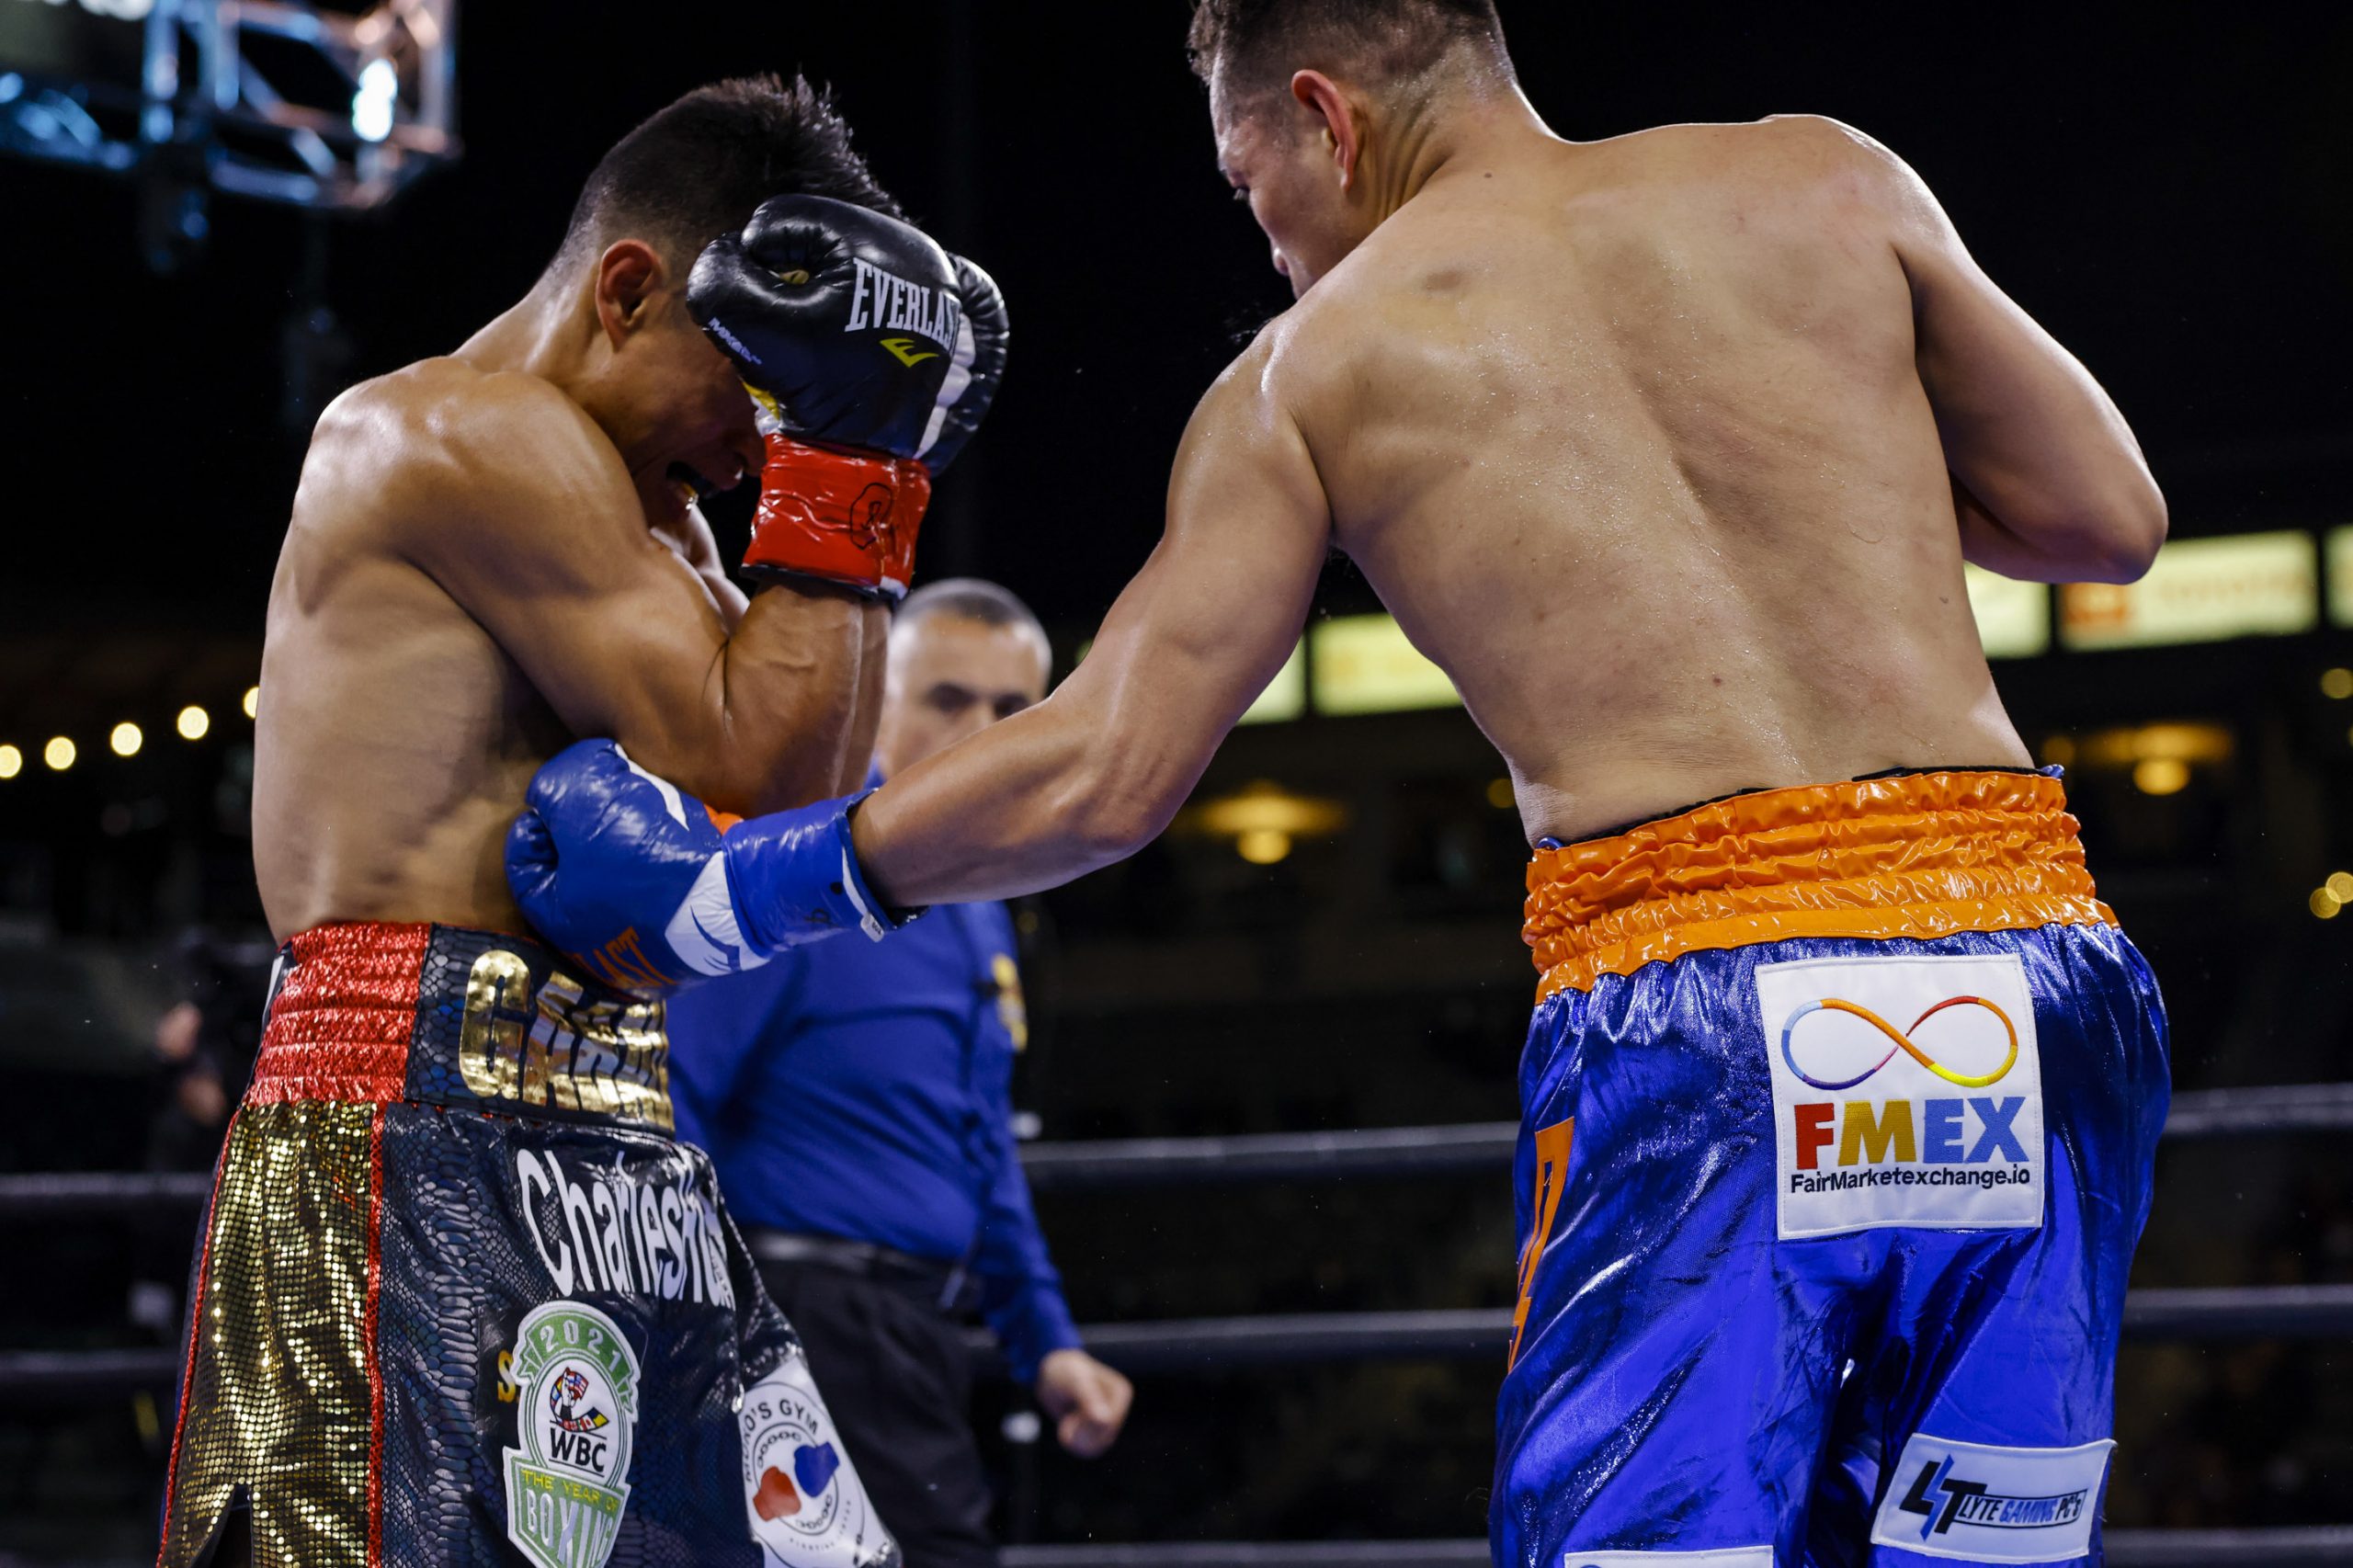 Nonito Donaire (right) nails Reymart Gaballo with the fight-ending body shot. Photo credit: Esther Lin/Showtime